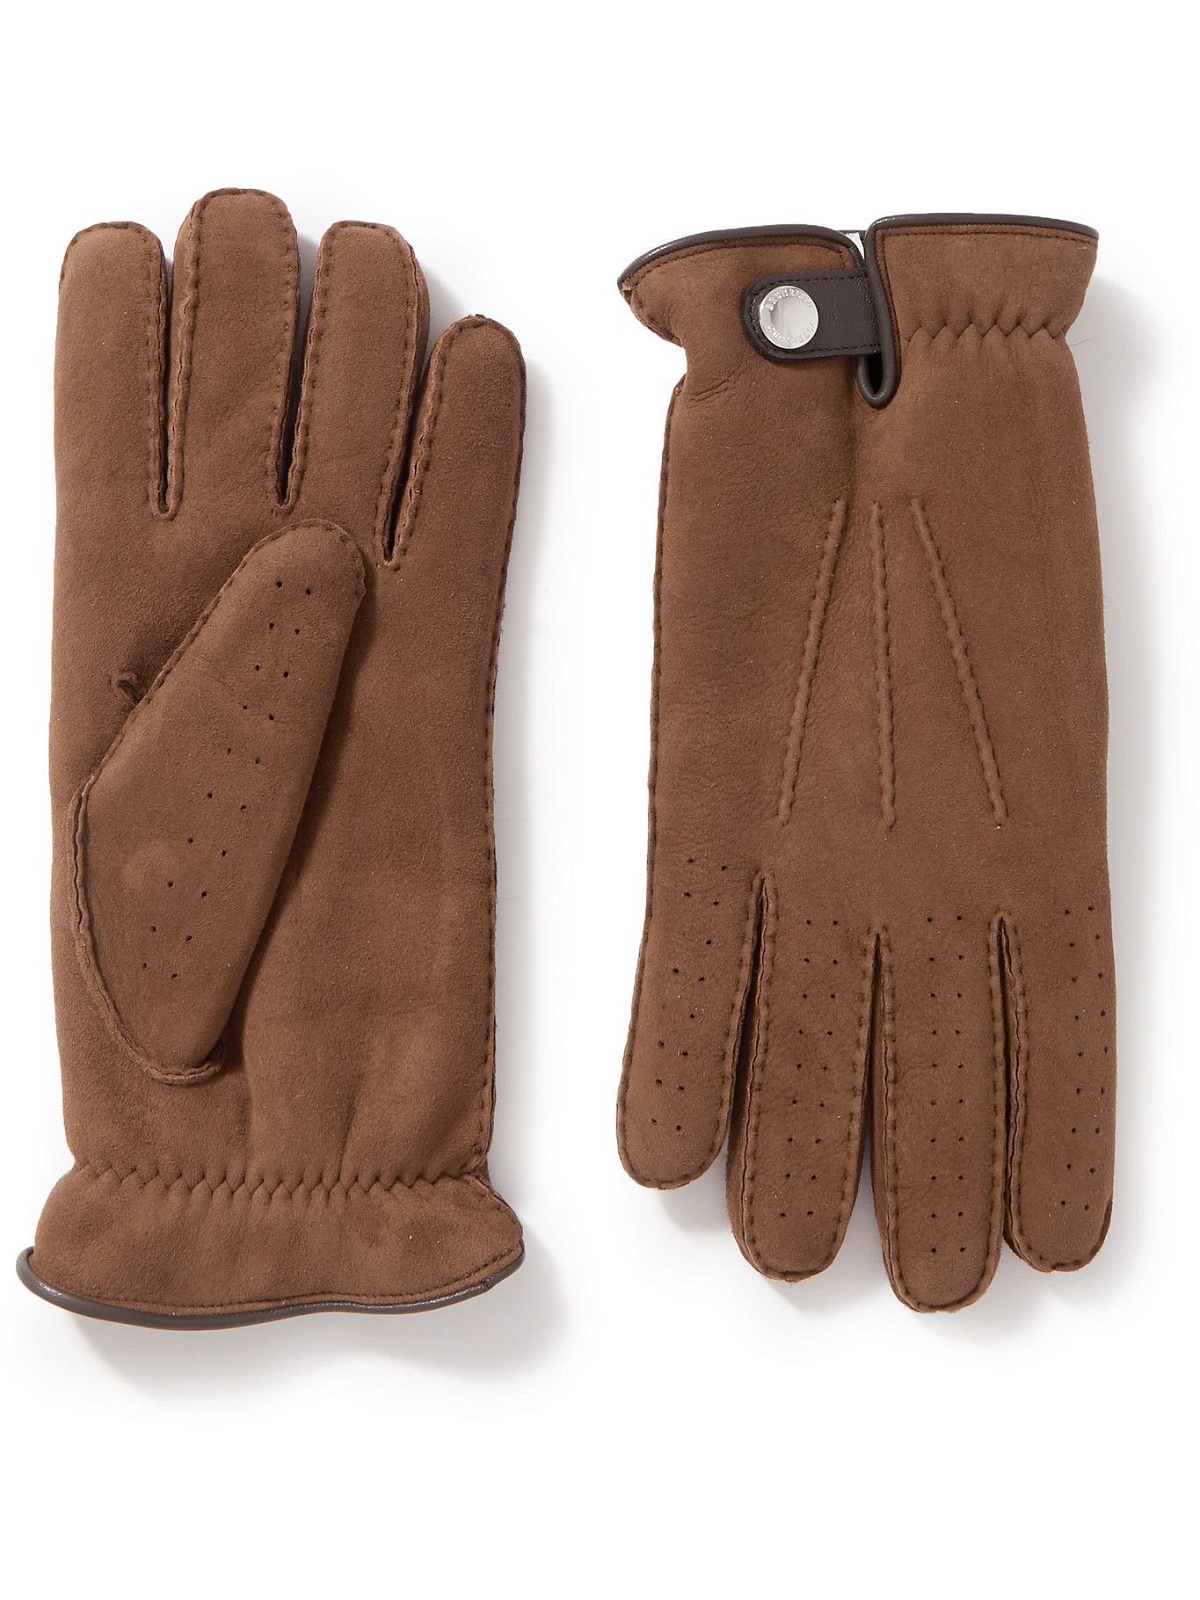 Photo: BRUNELLO CUCINELLI - Shearling-Lined Perforated Suede Gloves - Brown